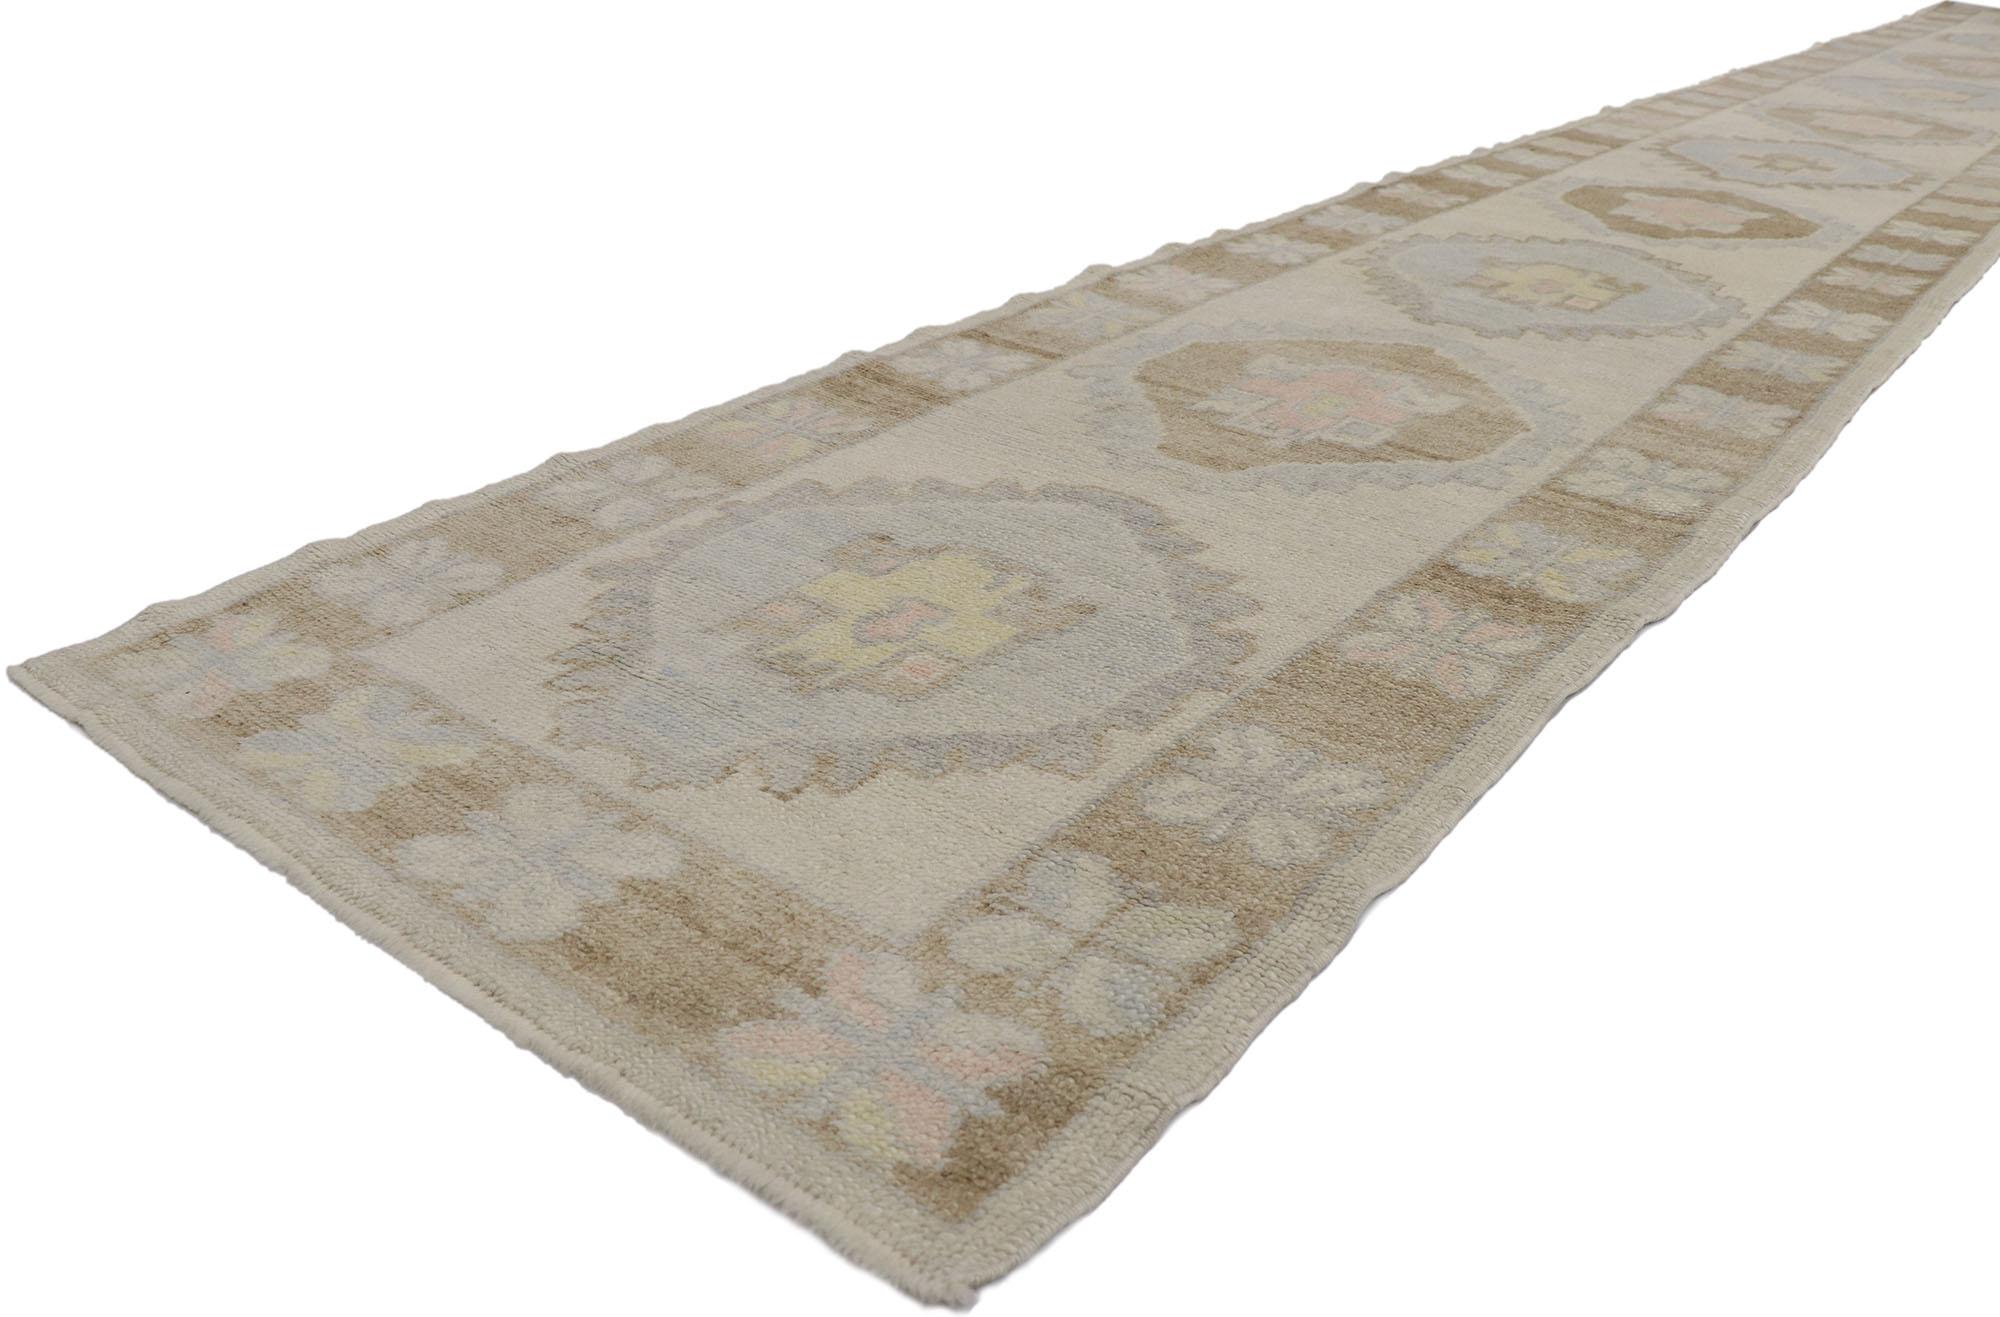 53588 New Contemporary Turkish Oushak Runner with Modern Style 03'00 x 21'05. This hand-knotted wool contemporary Turkish Oushak runner features an all-over geometric pattern spread across an abrashed gray striated field. An array of tribal motifs